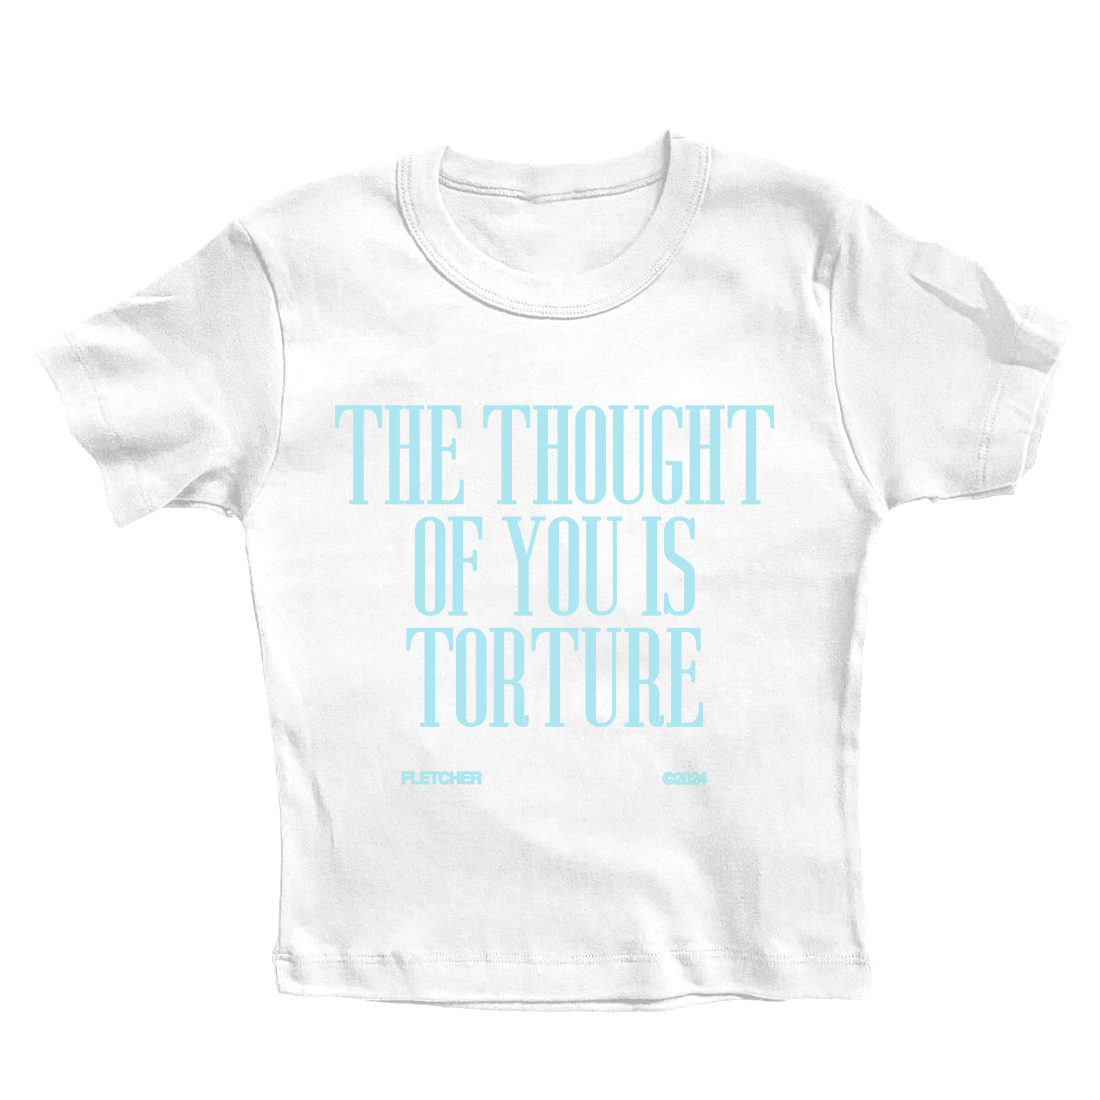 FLETCHER - THE THOUGHT OF YOU IS TORTURE Baby Tee